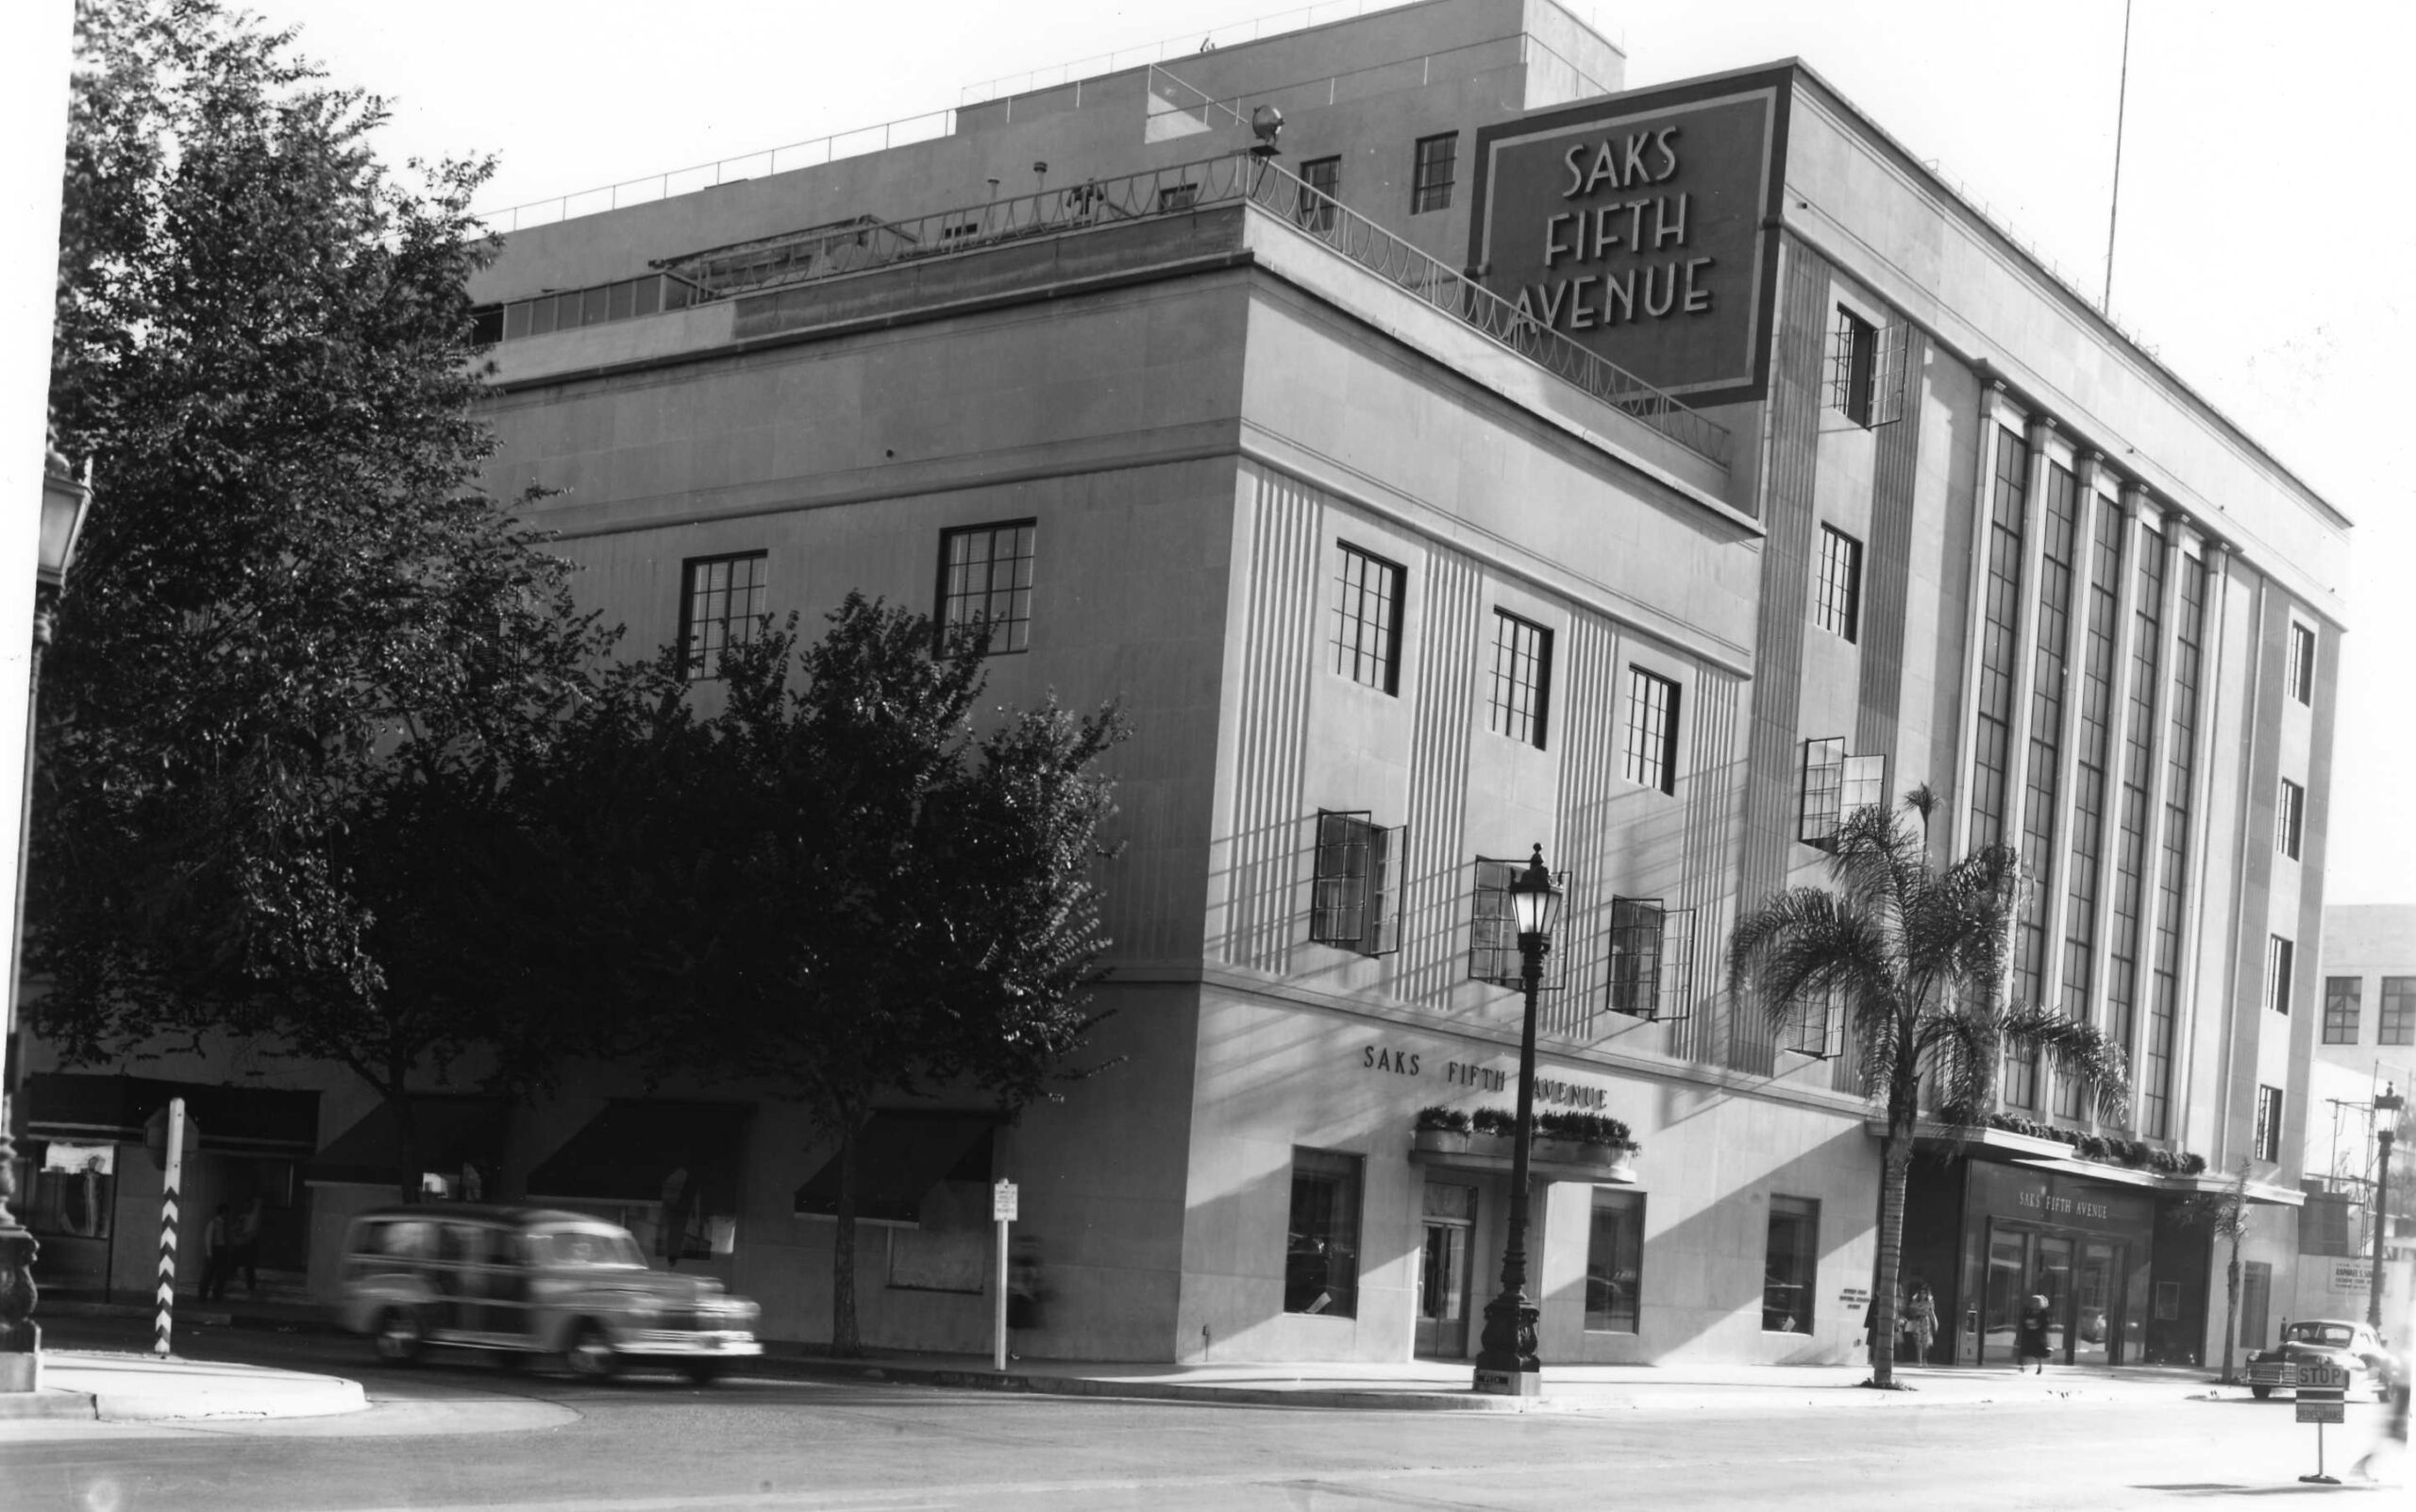 The new Saks Fifth Ave on Wilshire Blvd, Beverly Hills, 1935 - the